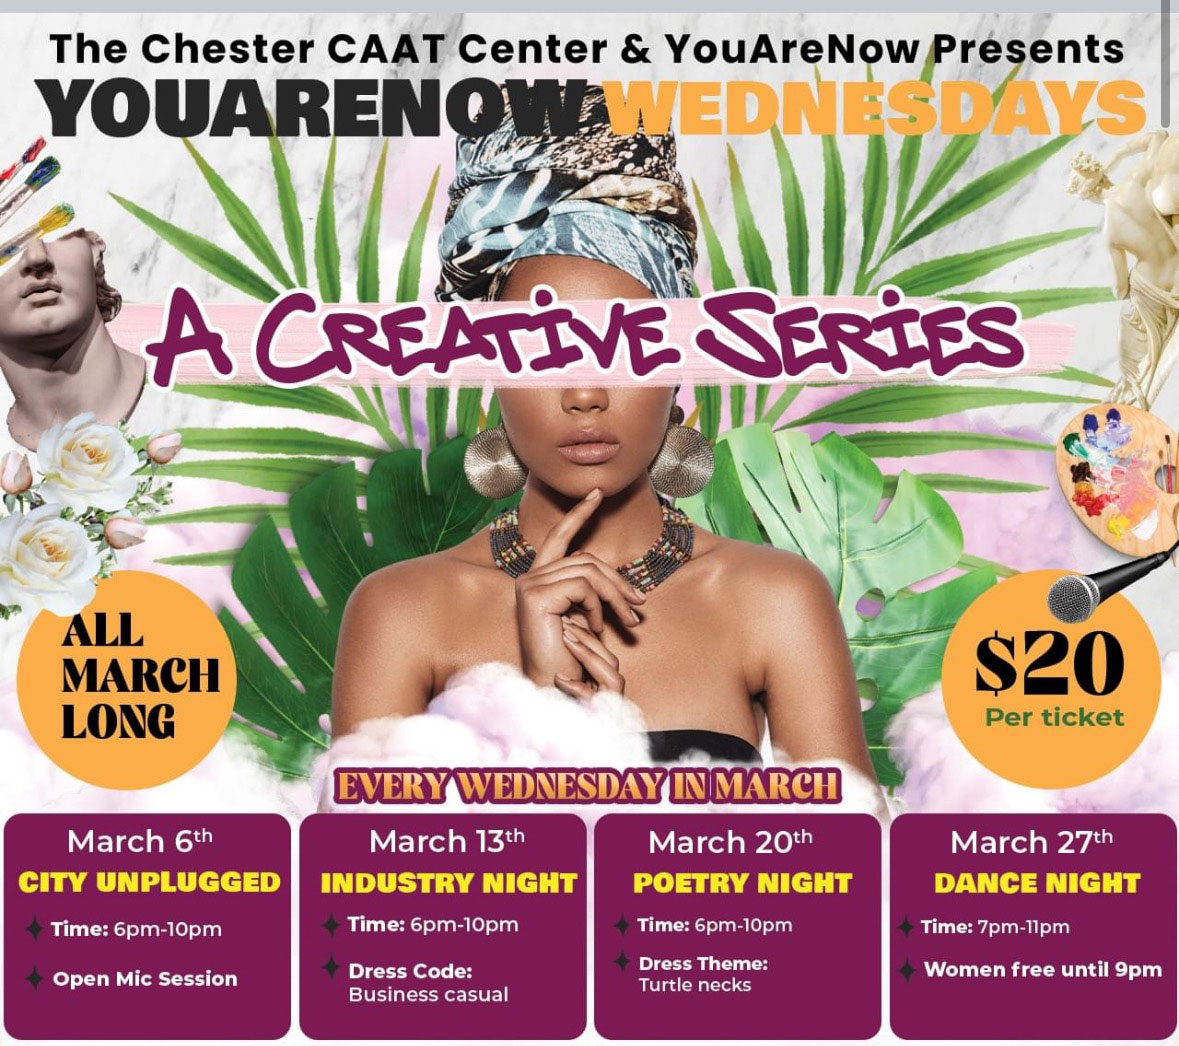 Downtown CAAT Center March events